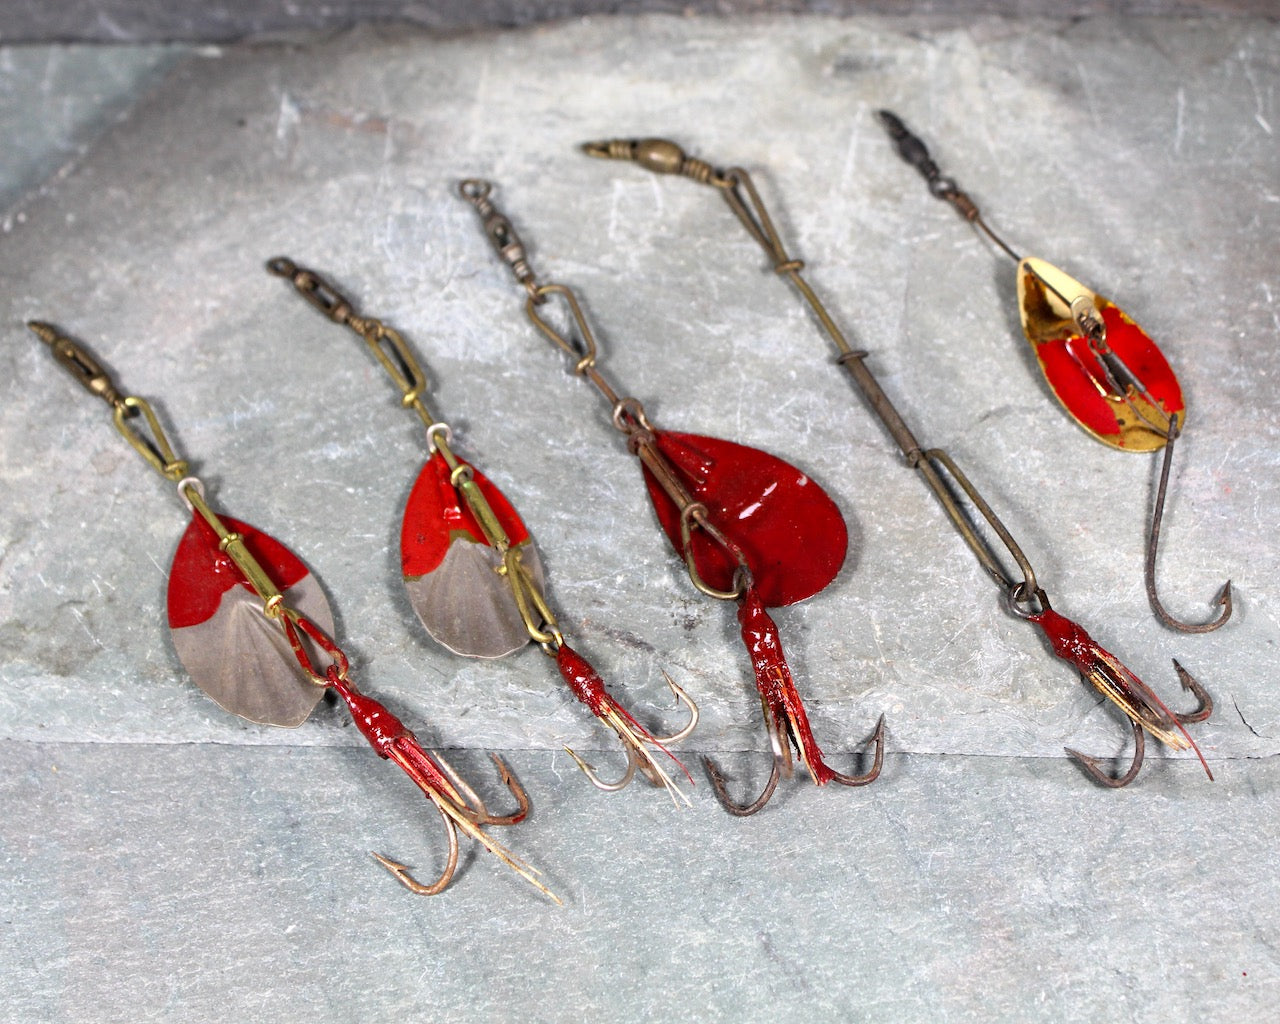 6 Vintage Spinner Lures / All Are Different / All Original / in Good  Condition / Great for Shore & Pier Fishing / Collectible / Gift Item